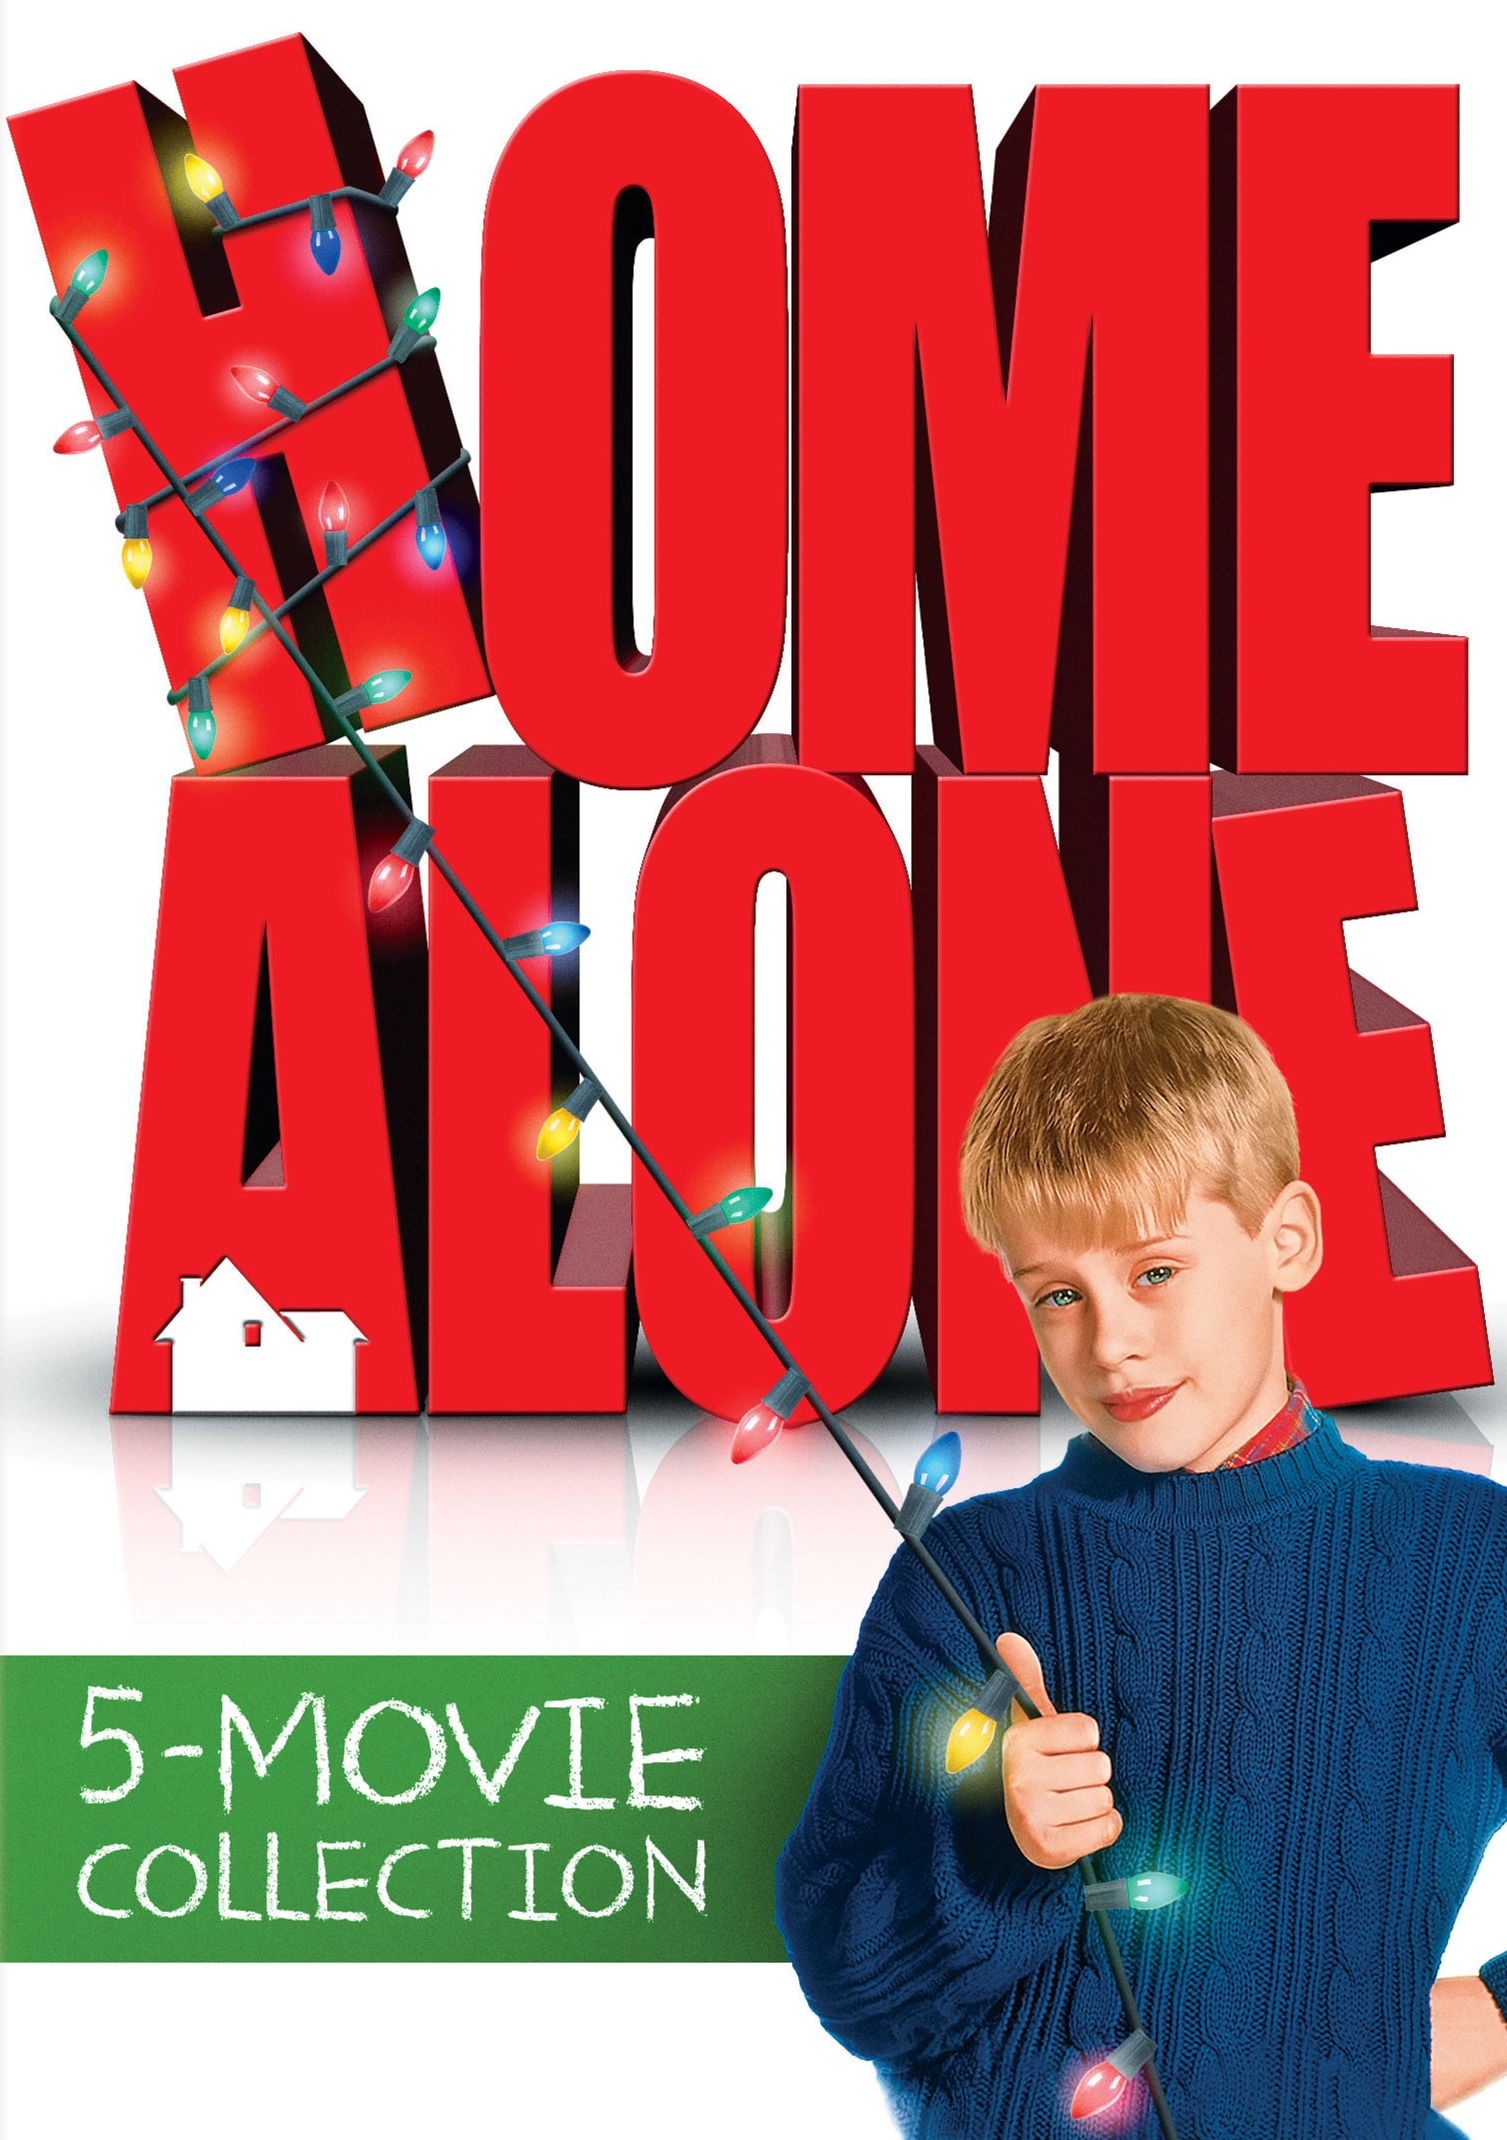 home alone the holiday heist dvd